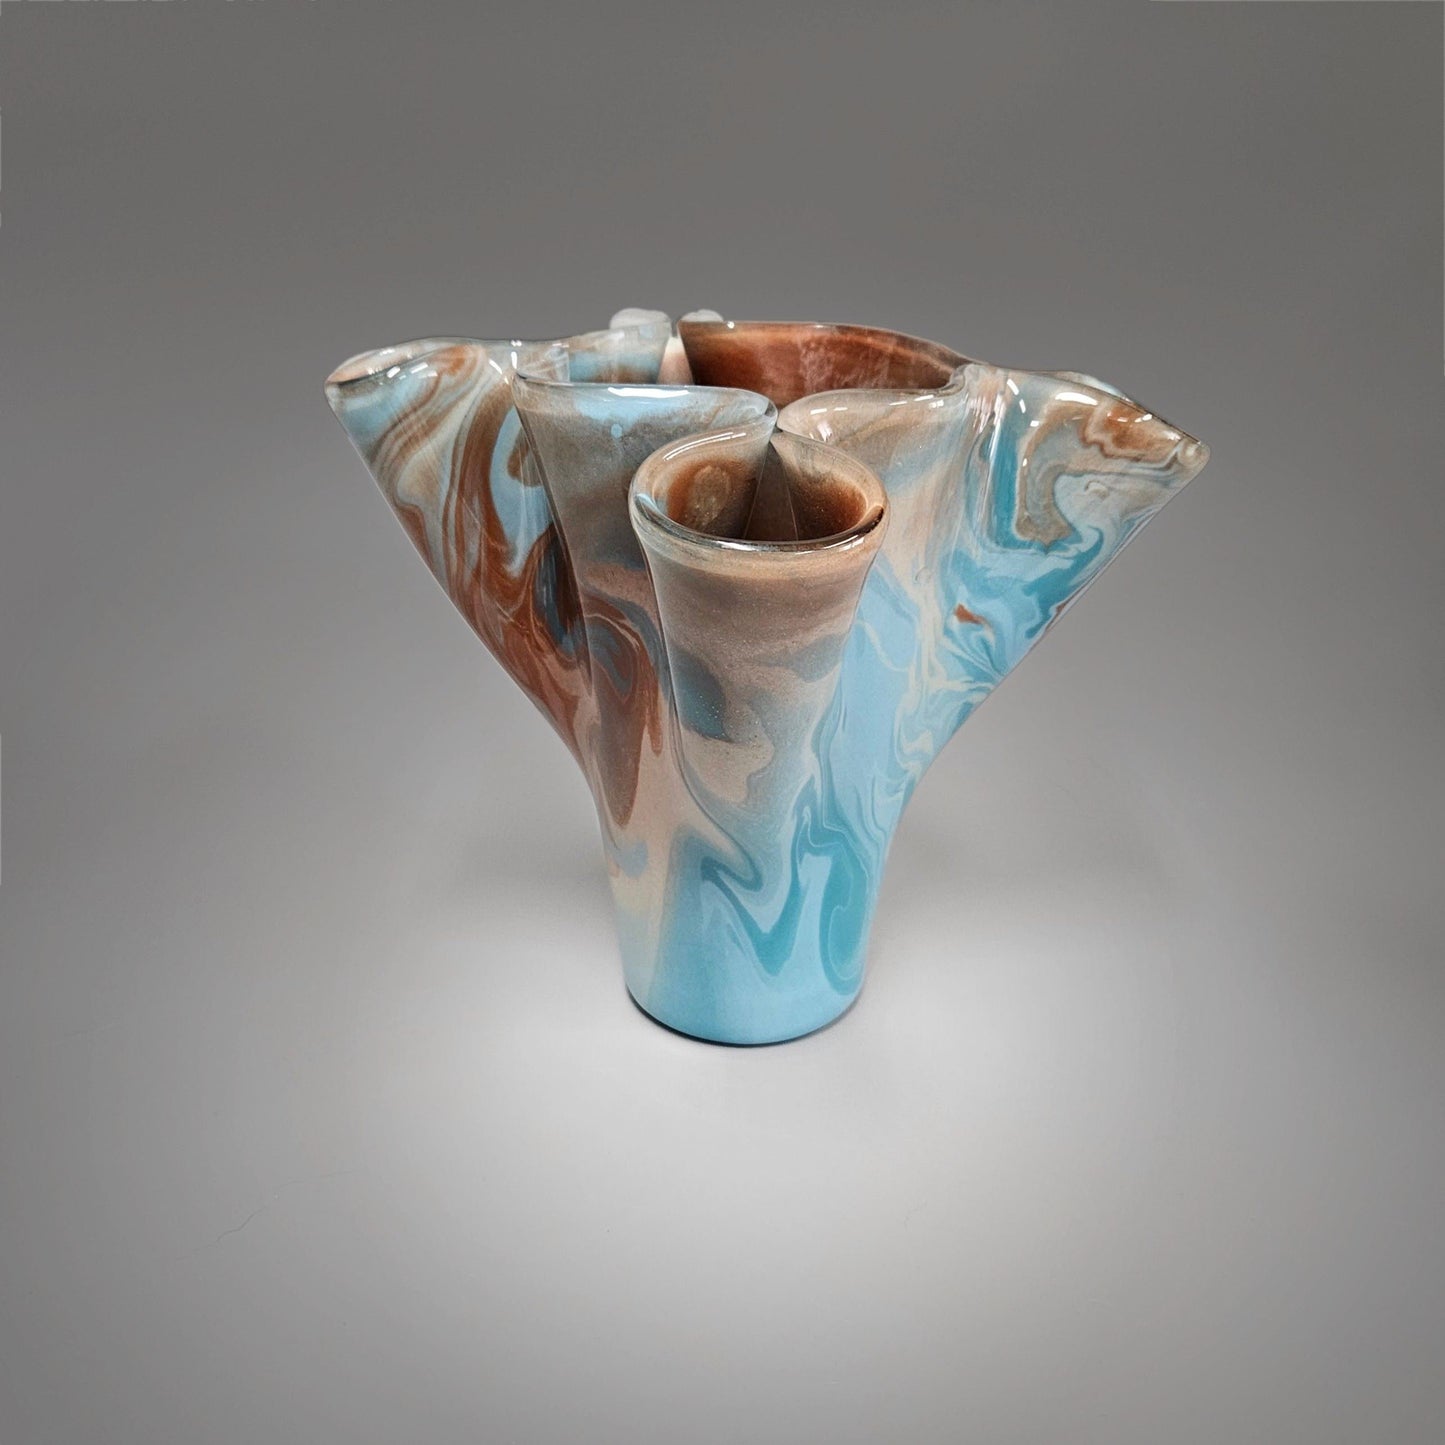 Glass Art Vase in Teal Turquoise and Brown